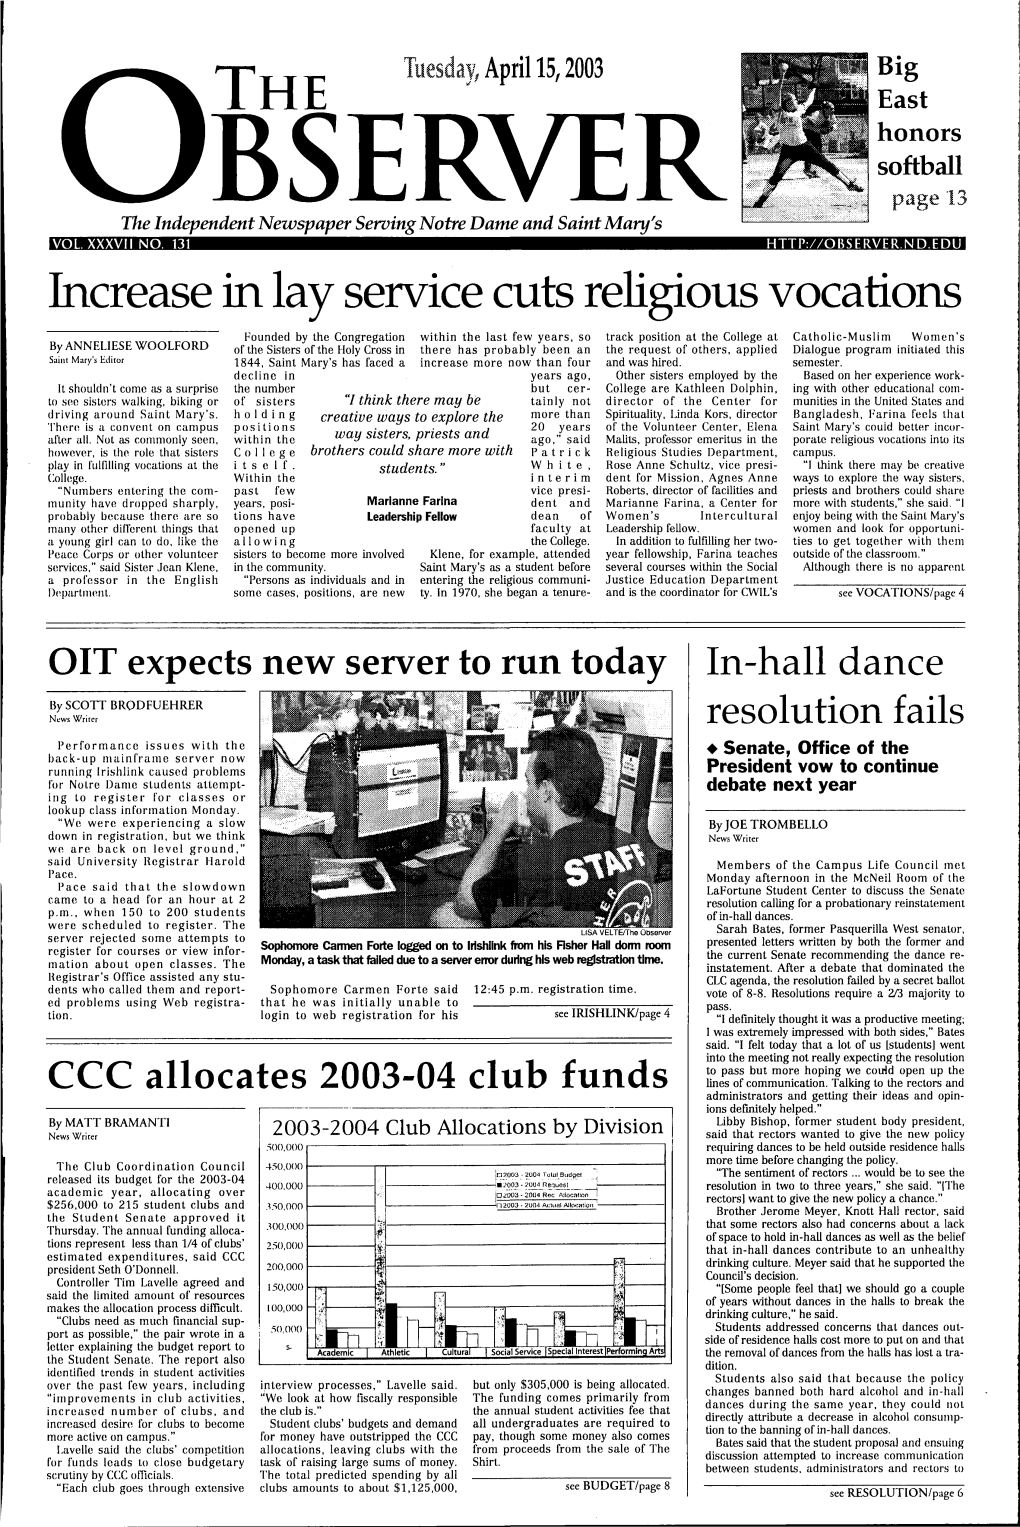 Increase in Lay Service Cuts Religious Vocations